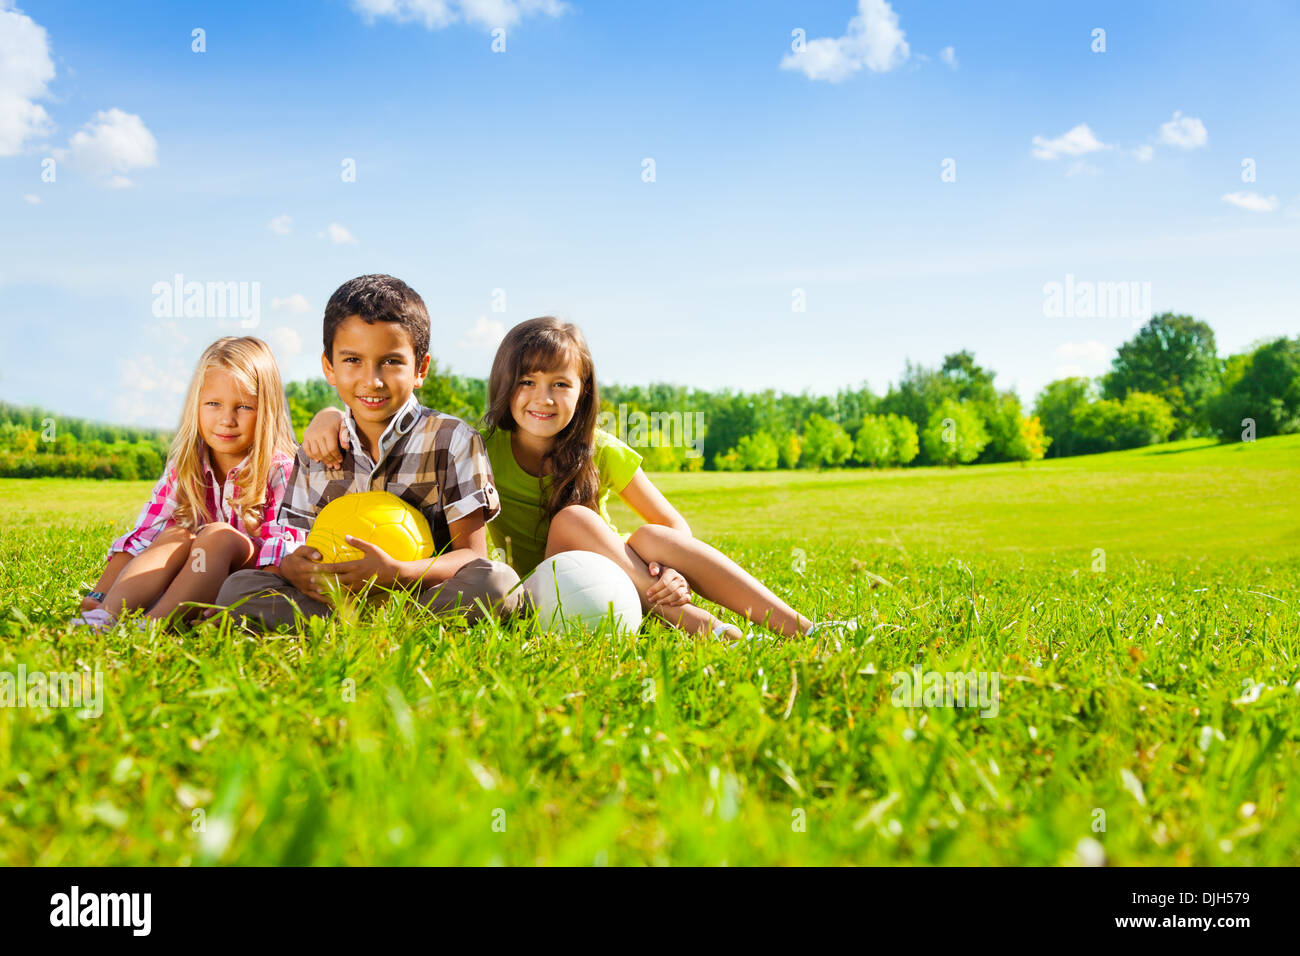 Three happy kids, boy and girls sitting in the sunny summer park holding sport balls Stock Photo